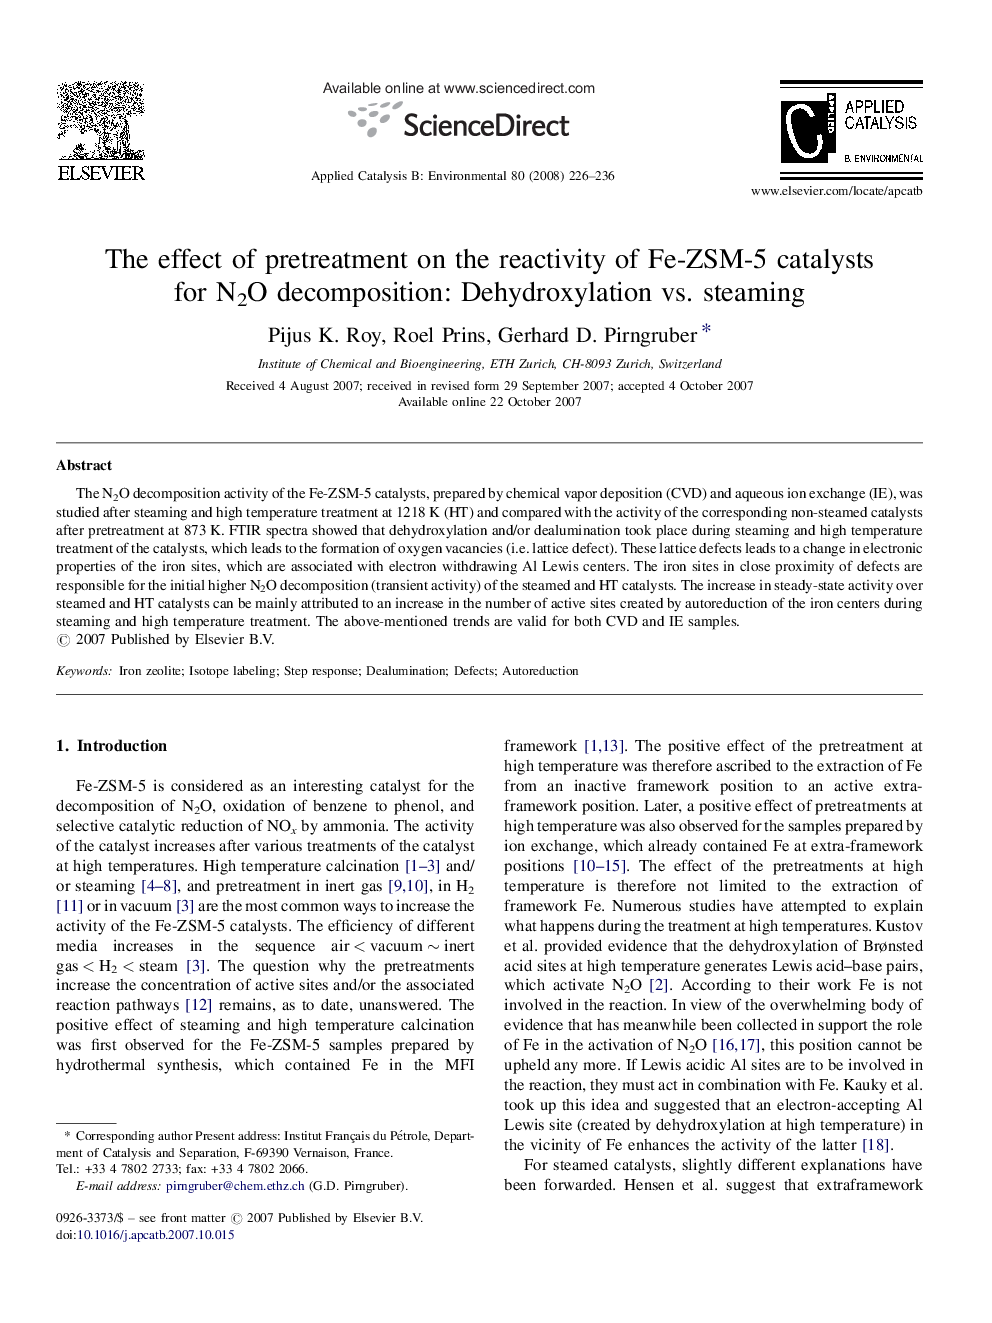 The effect of pretreatment on the reactivity of Fe-ZSM-5 catalysts for N2O decomposition: Dehydroxylation vs. steaming